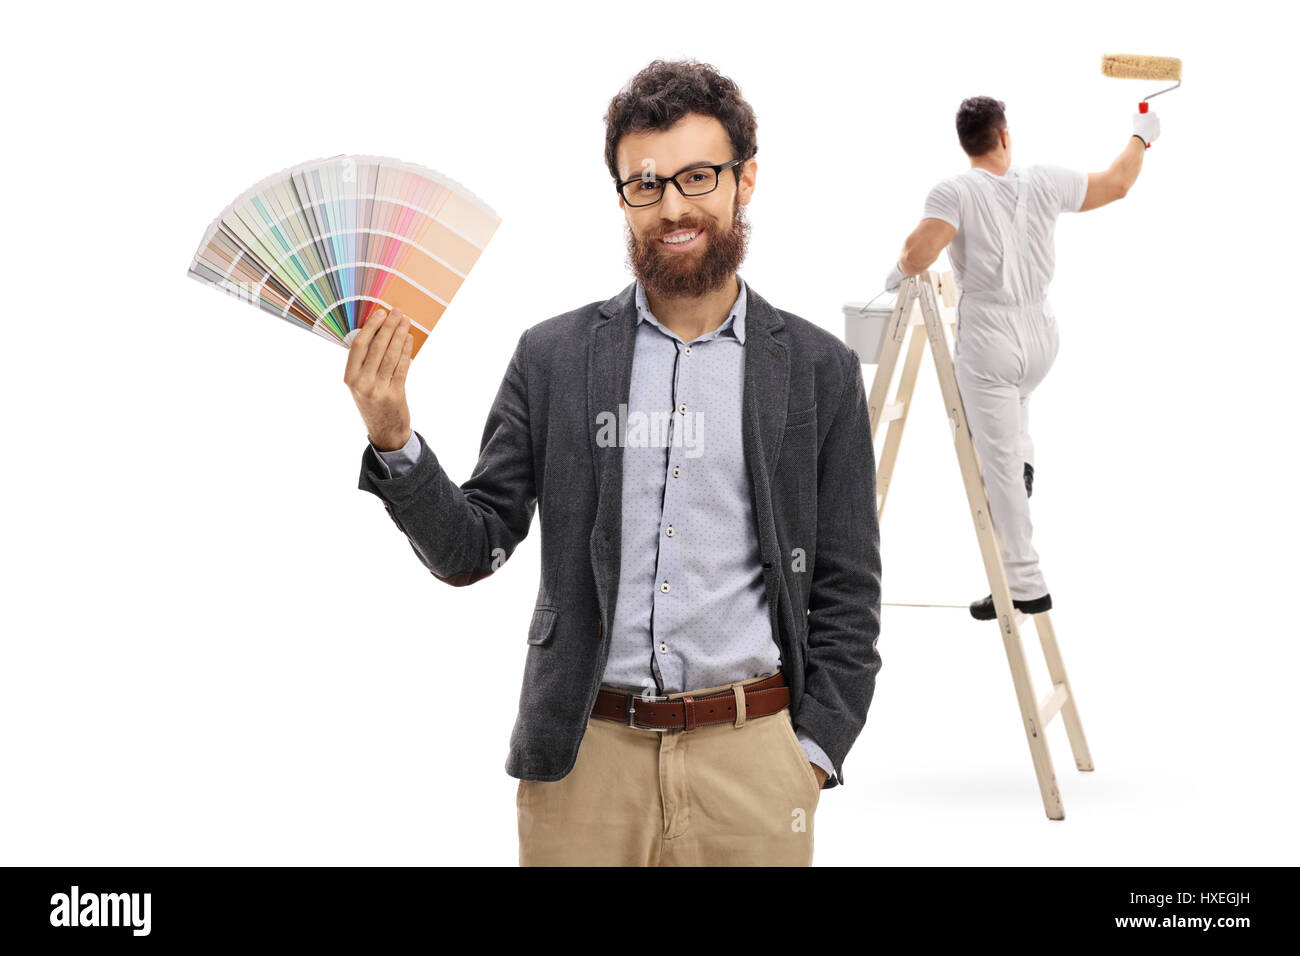 Young man holding a color swatch with a painter painting climbed up a ladder isolated on white background Stock Photo